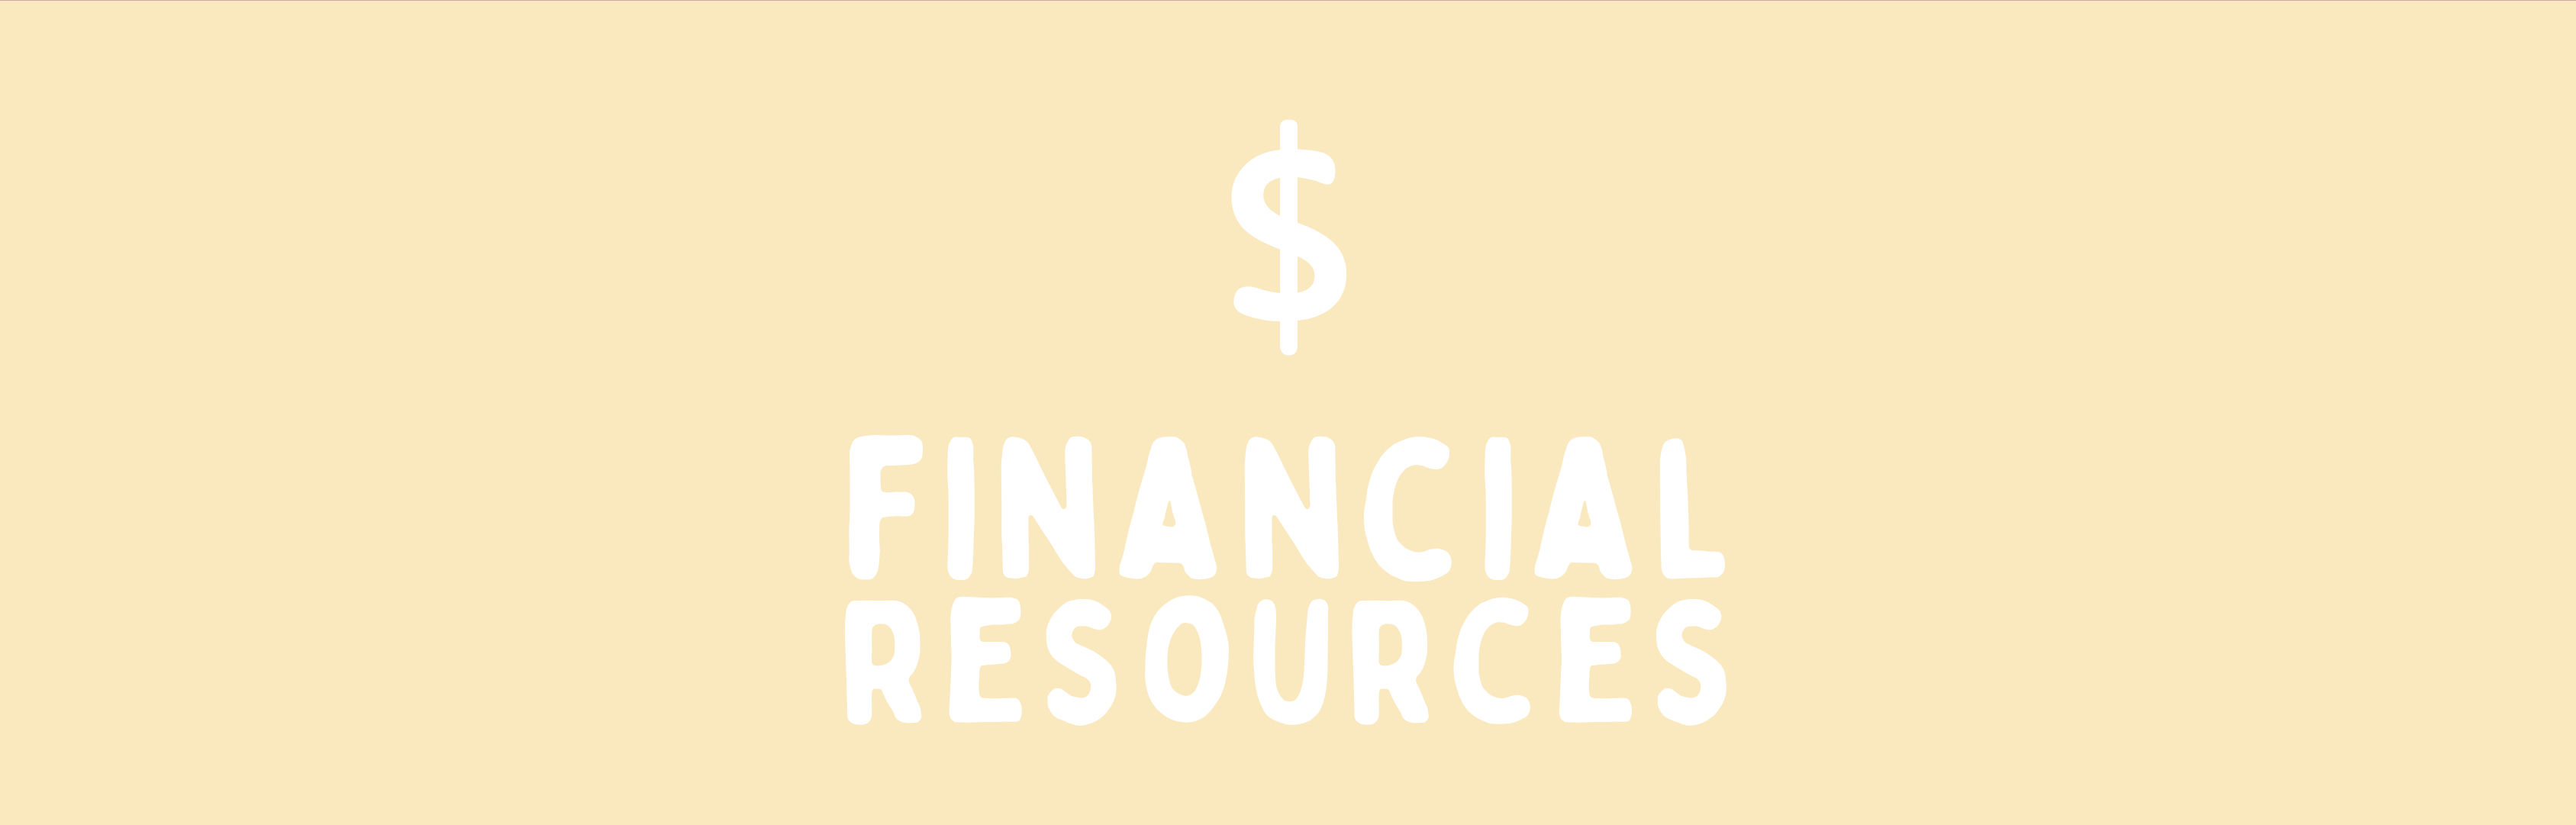 Graphic of Financial Resources